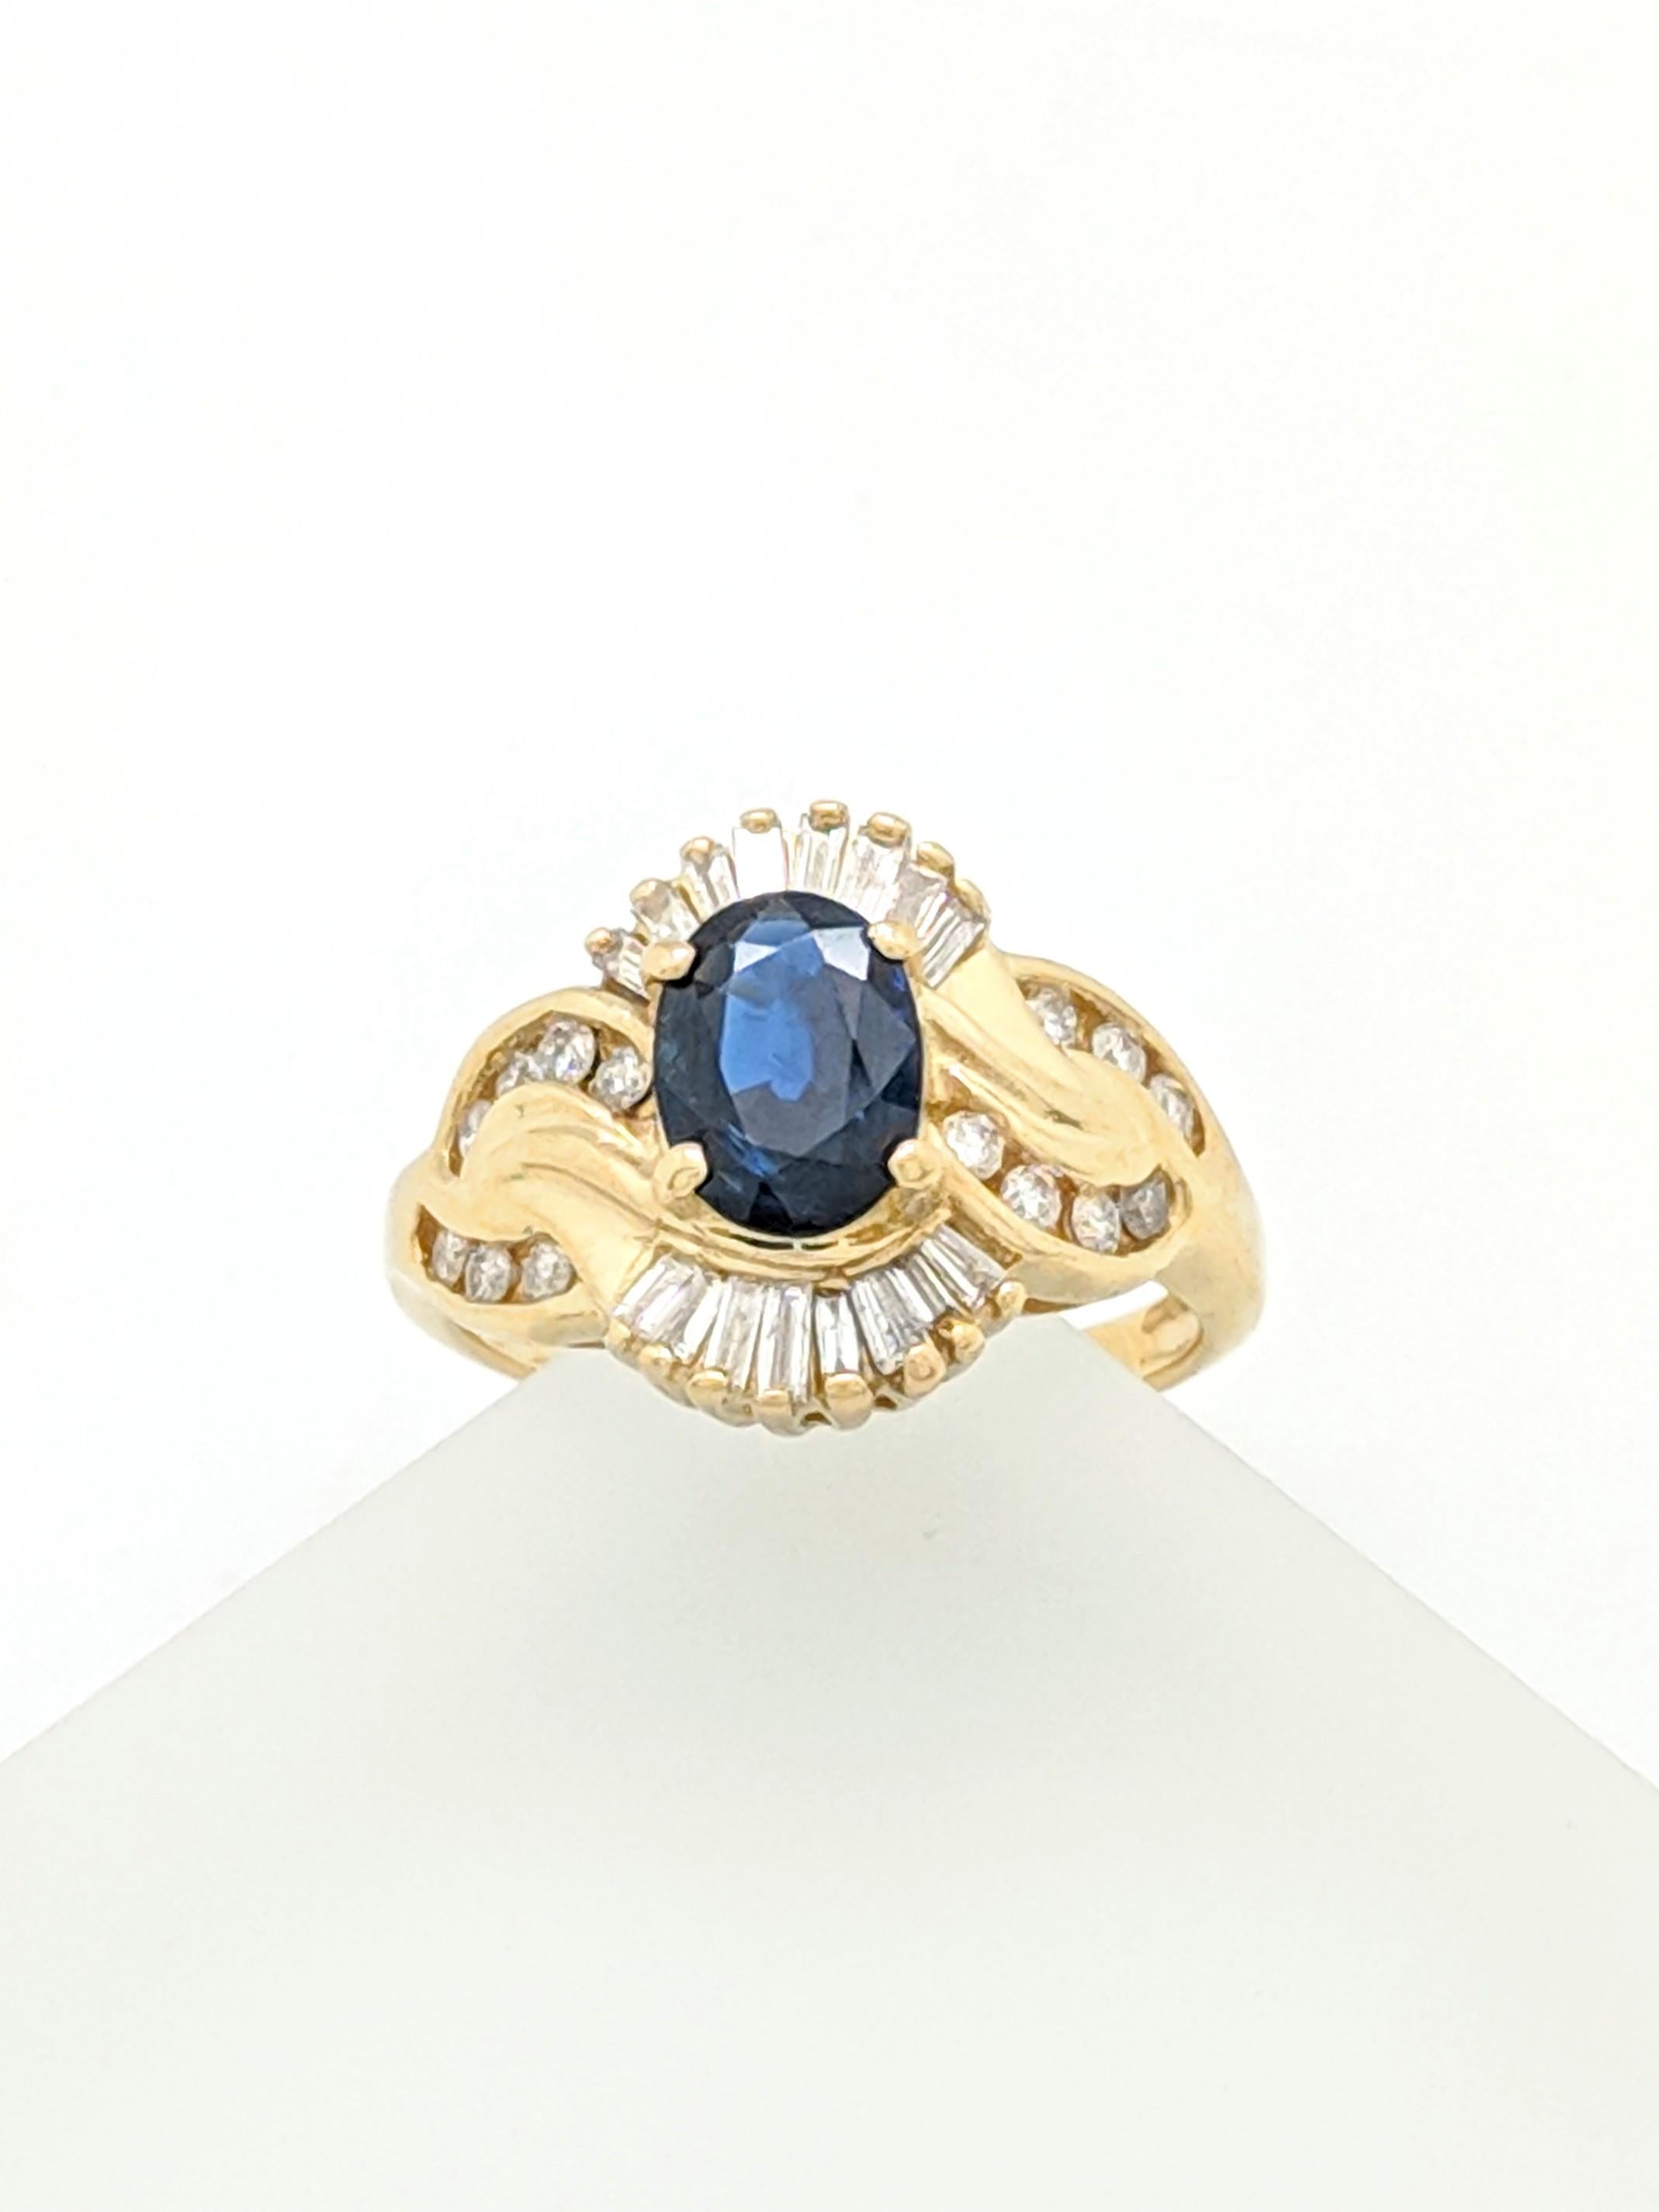 14 Karat Yellow Gold Sapphire and Diamond Estate Ring For Sale 1